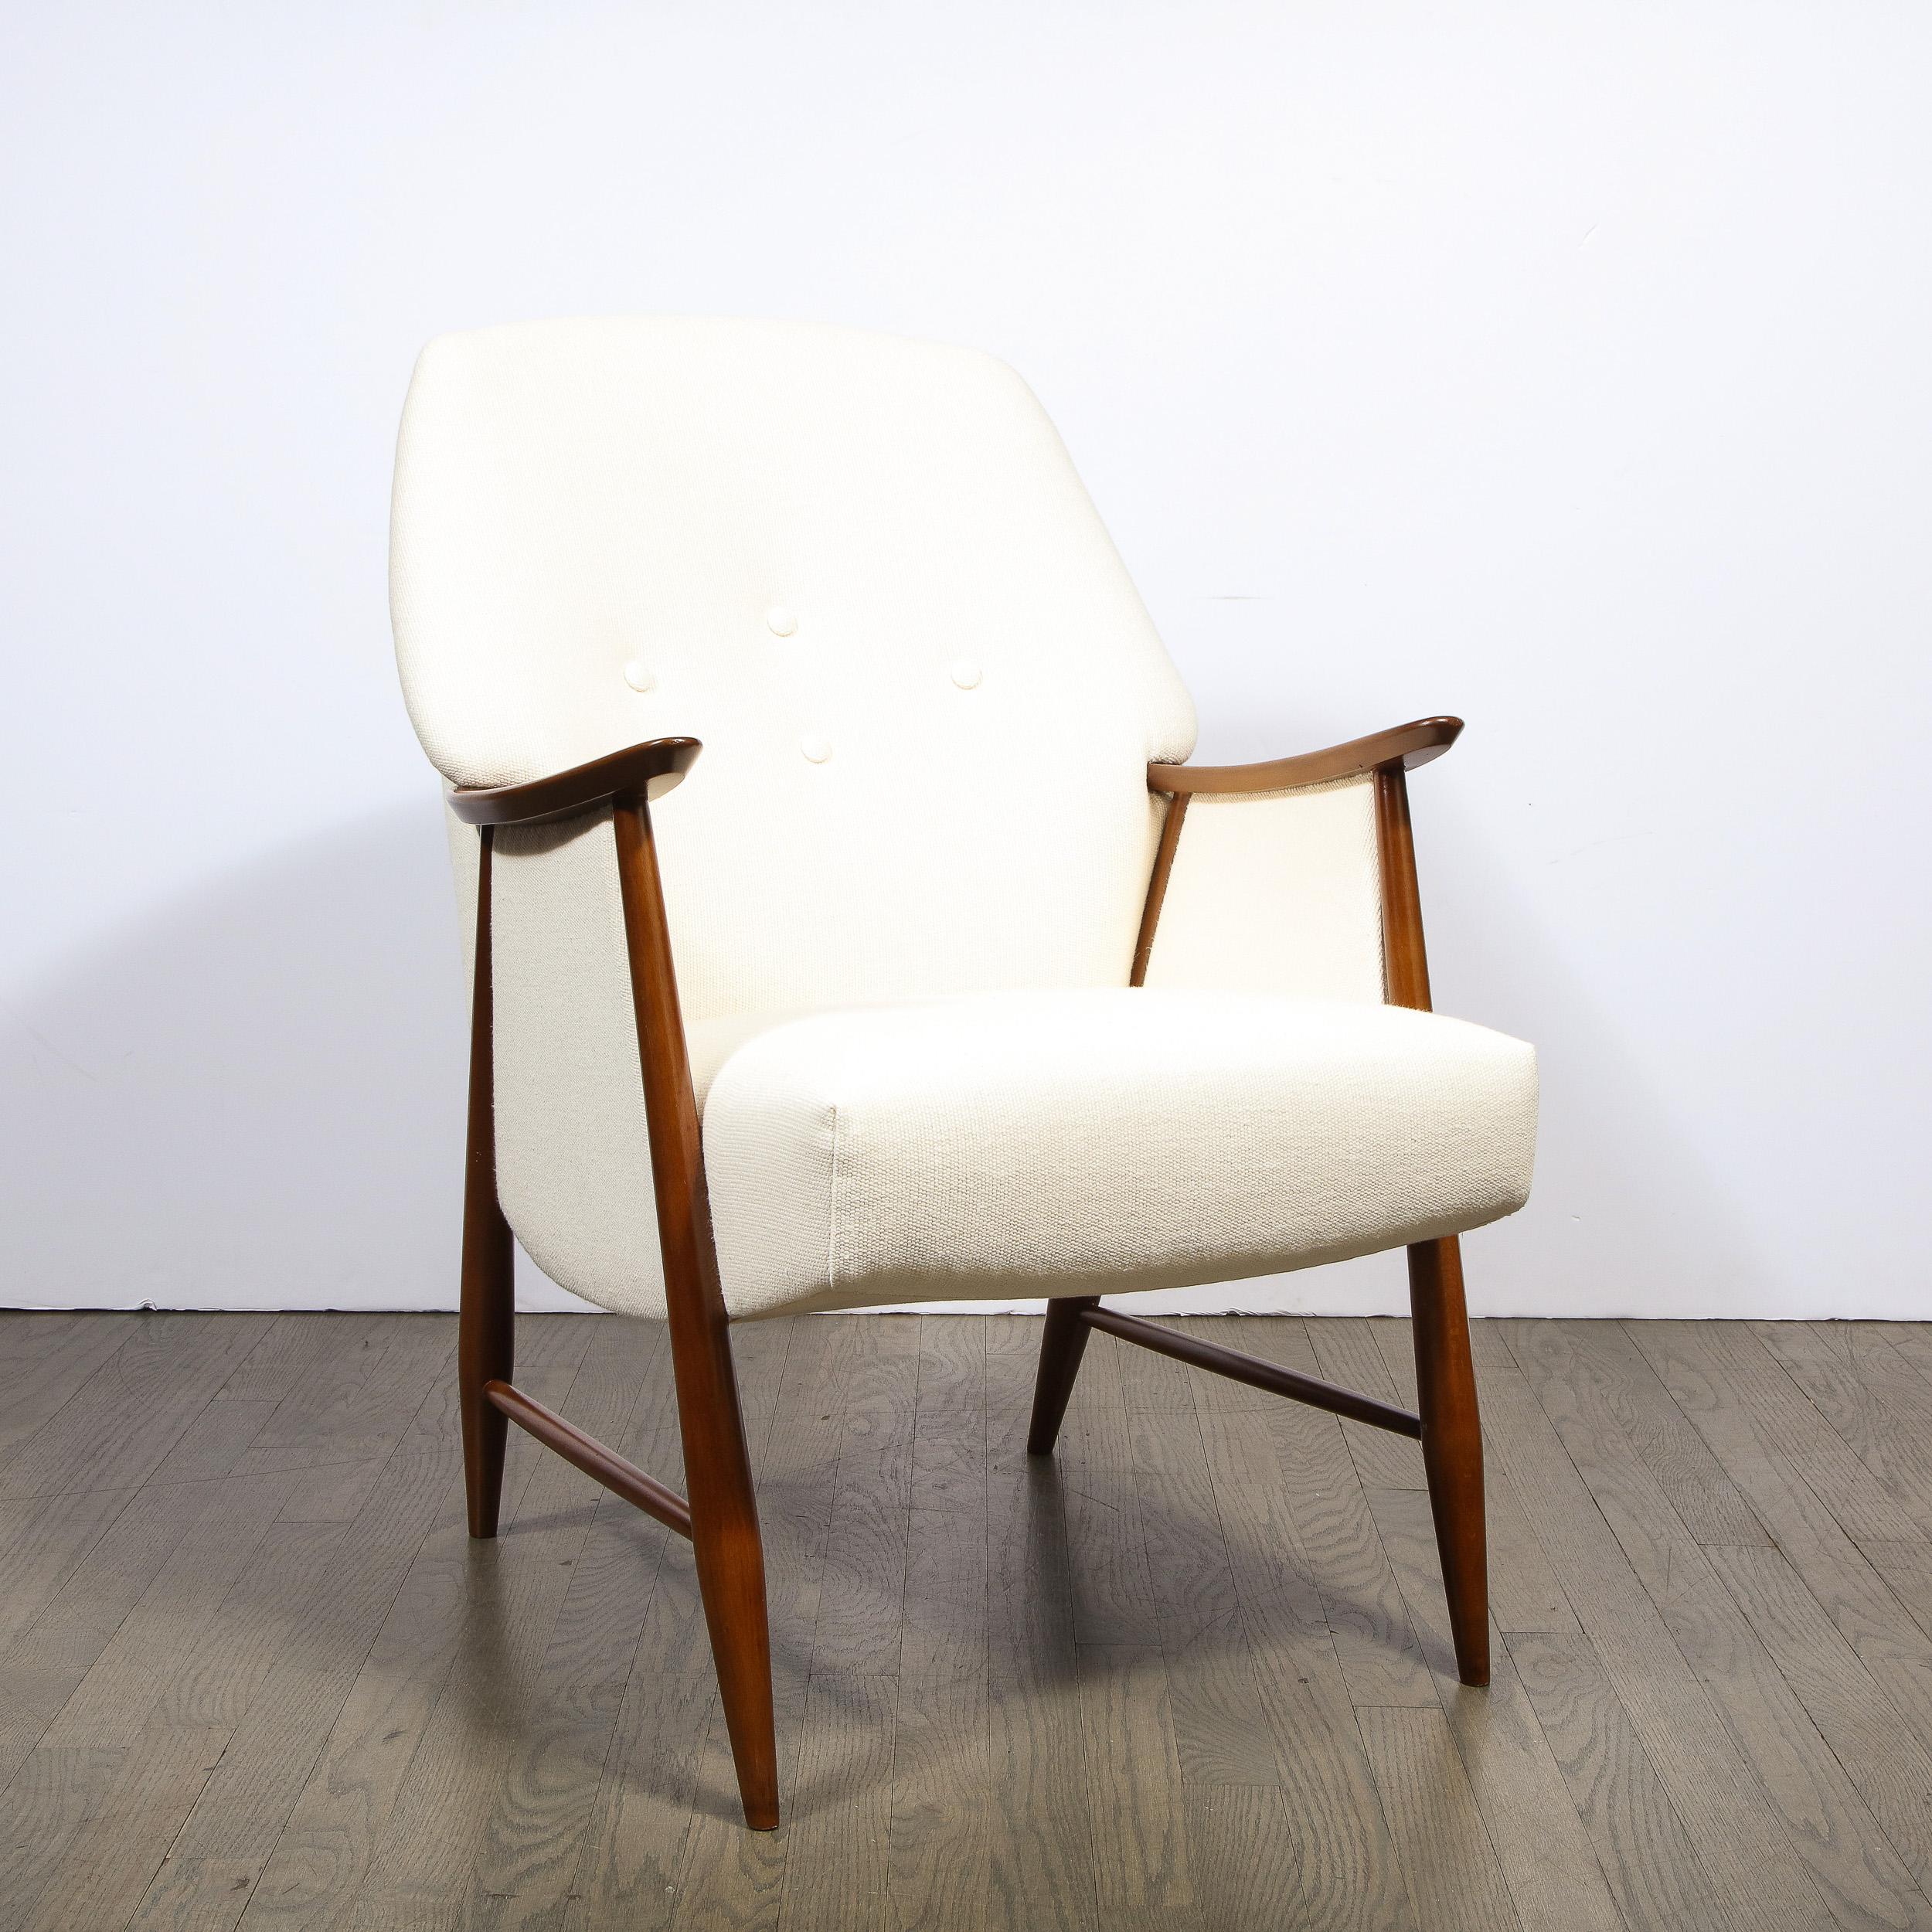 Swedish Pair of Mid-Century Modern Button Back Saddle-Armed Chairs in Handrubbed Walnut